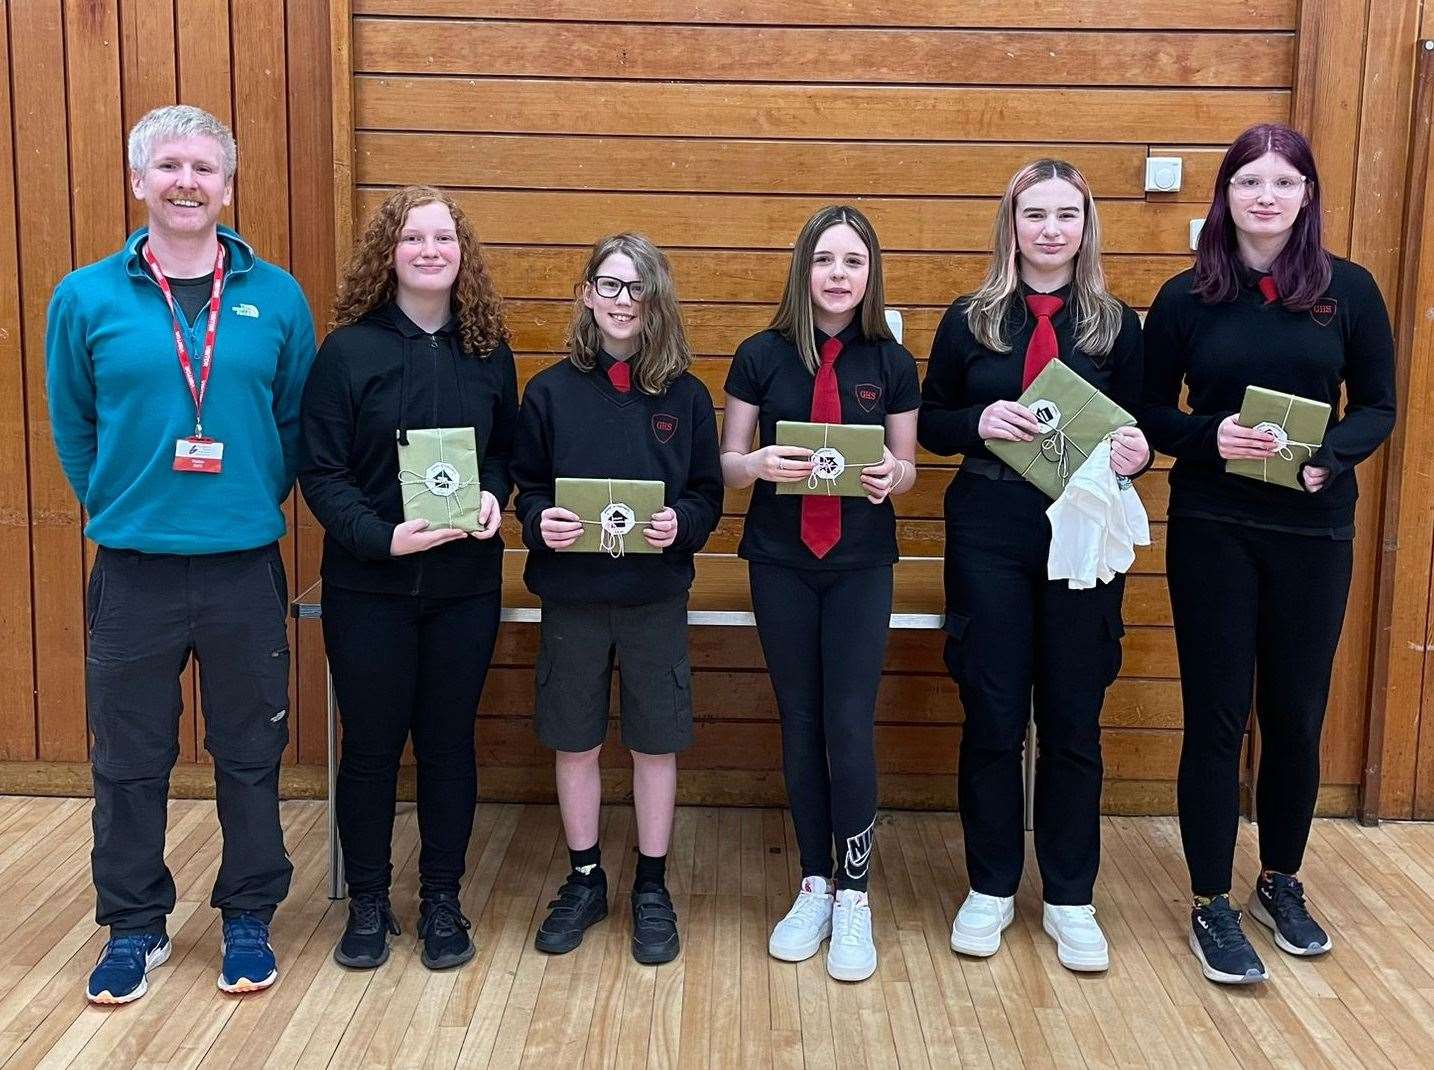 Ken with Golspie pupils Aoife Lee, Angus Masson, Stacie Taylor, Lola Greaves and Rosalie Siby, who all took part in the JOGT stamps competition.